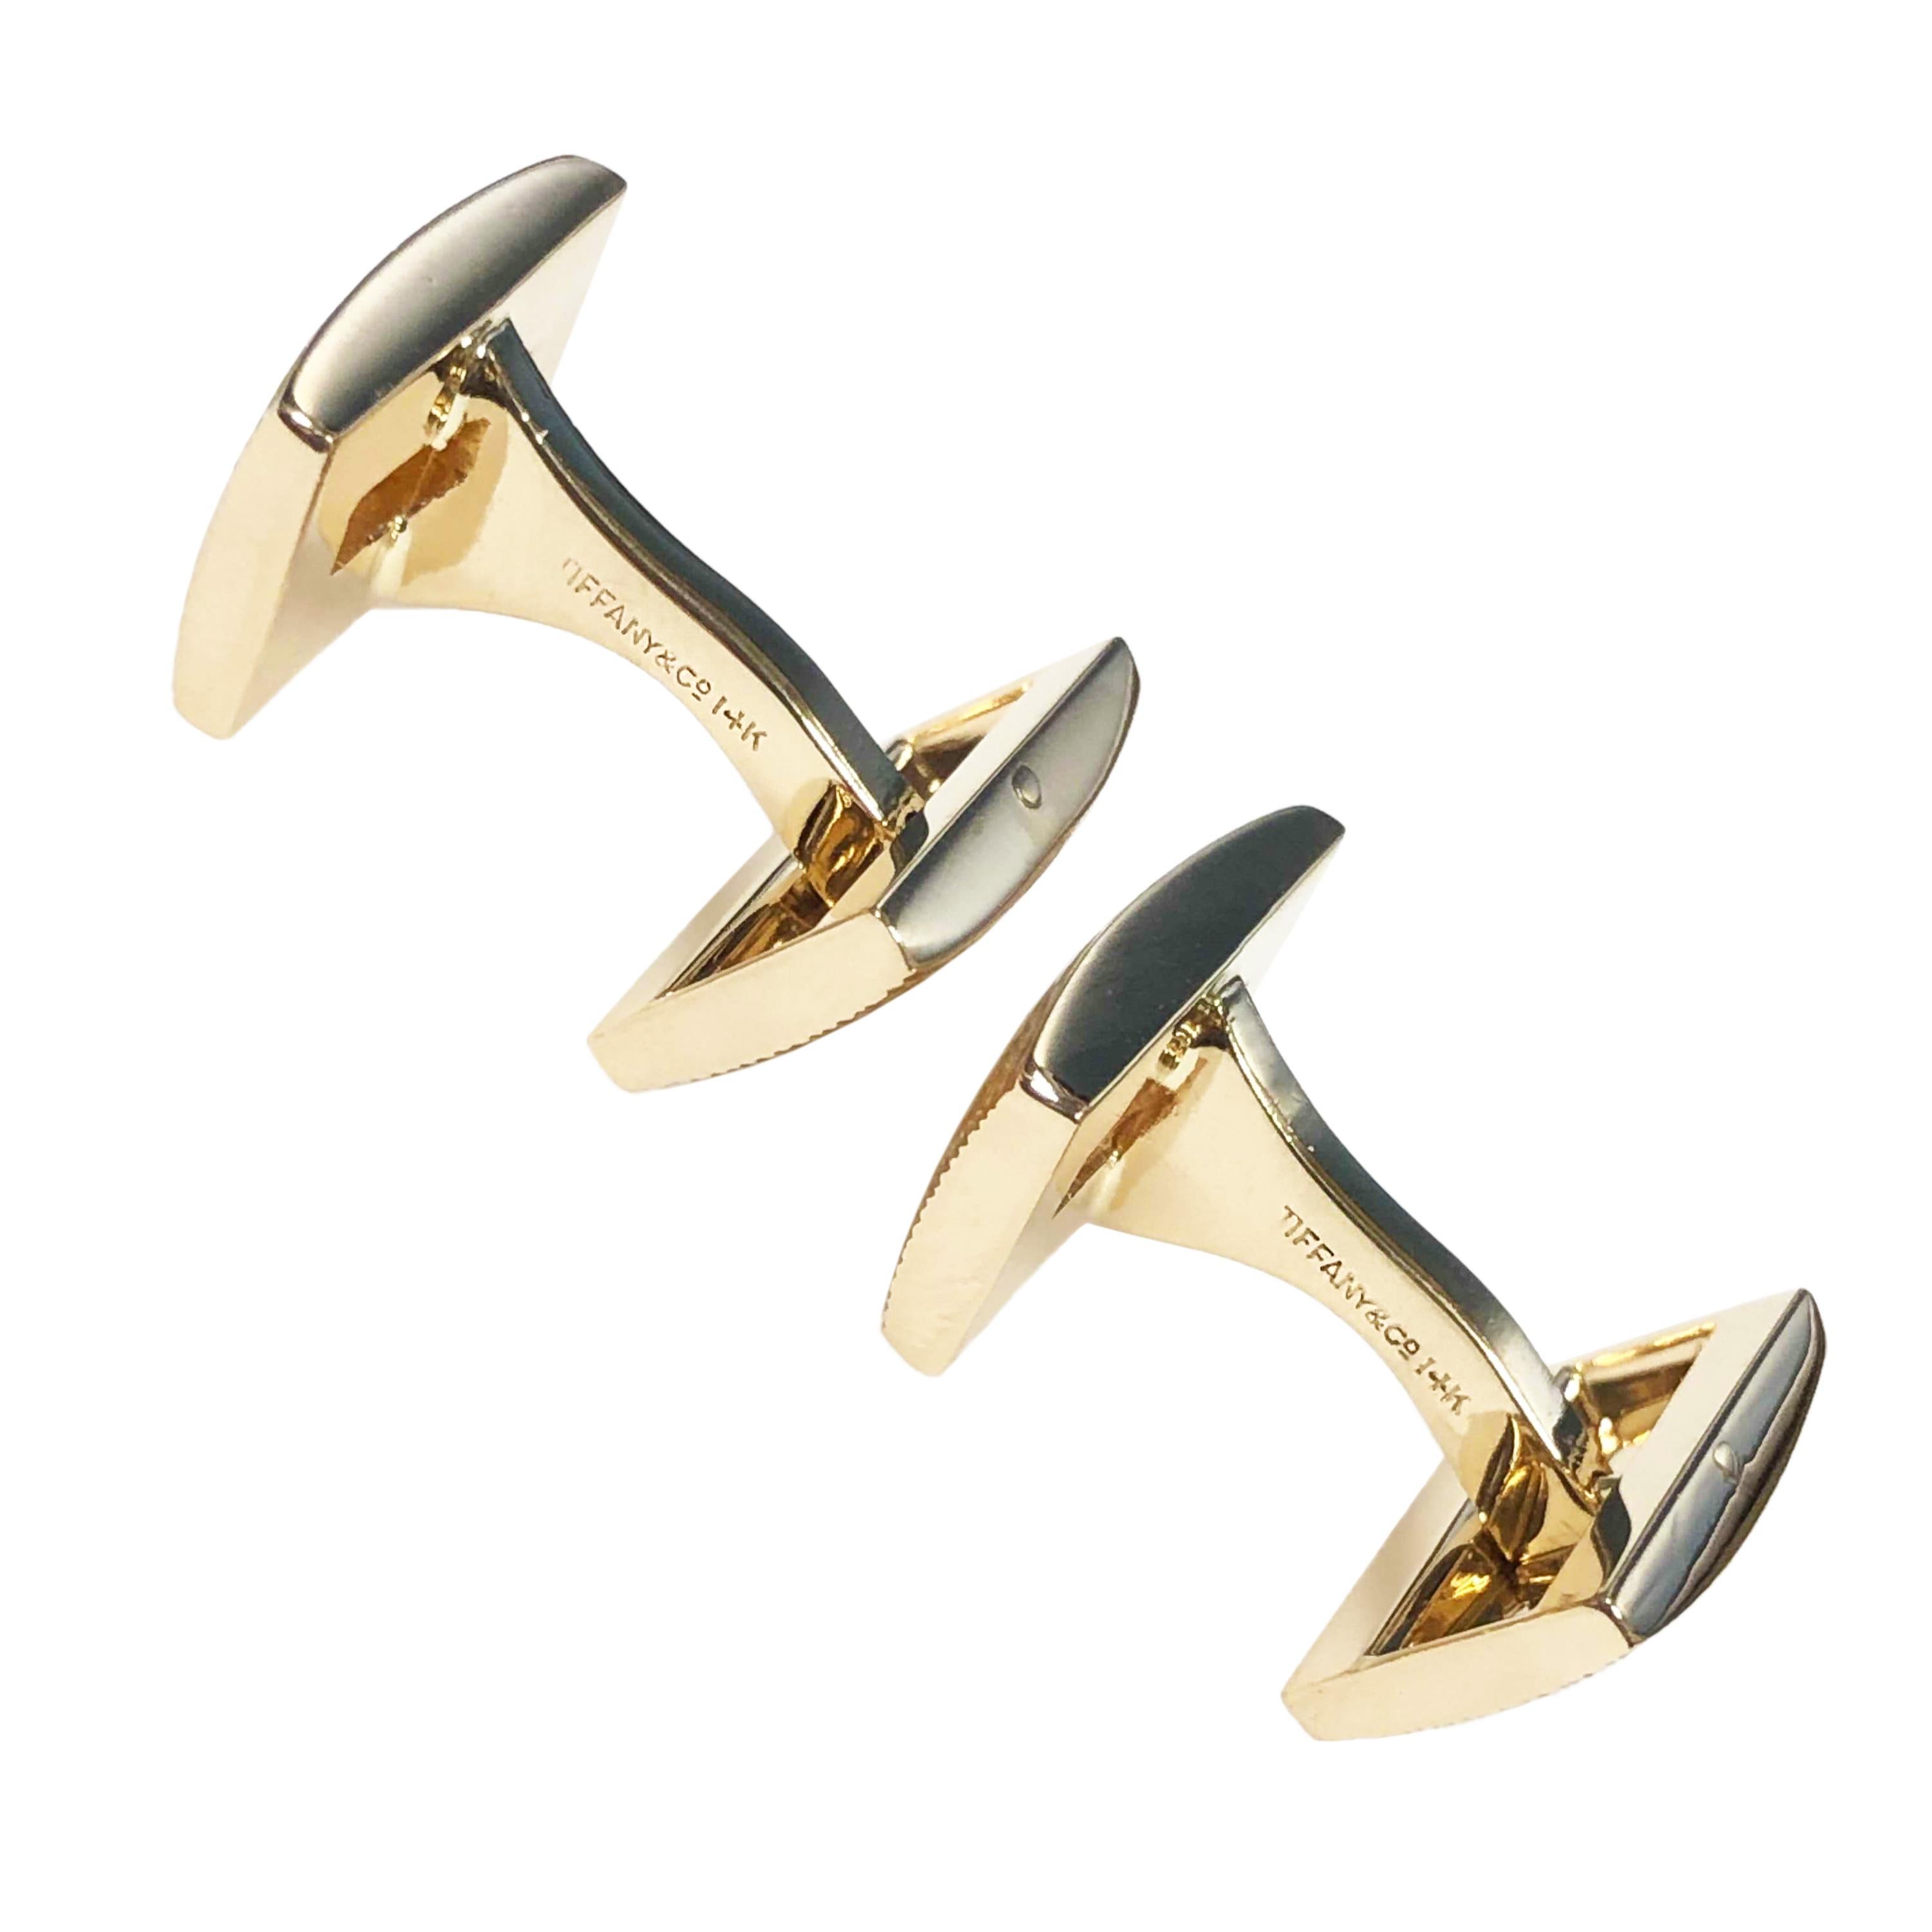 Circa 1990 Tiffany & Company 14K Yellow Gold Cufflinks, having a textured finish and centrally set with Square Step cut Diamonds totaling .75 Carat. The tops of the cufflinks measure 5/8 X 3/8 inch. Easy to Put on with a hinged toggle back. Come in